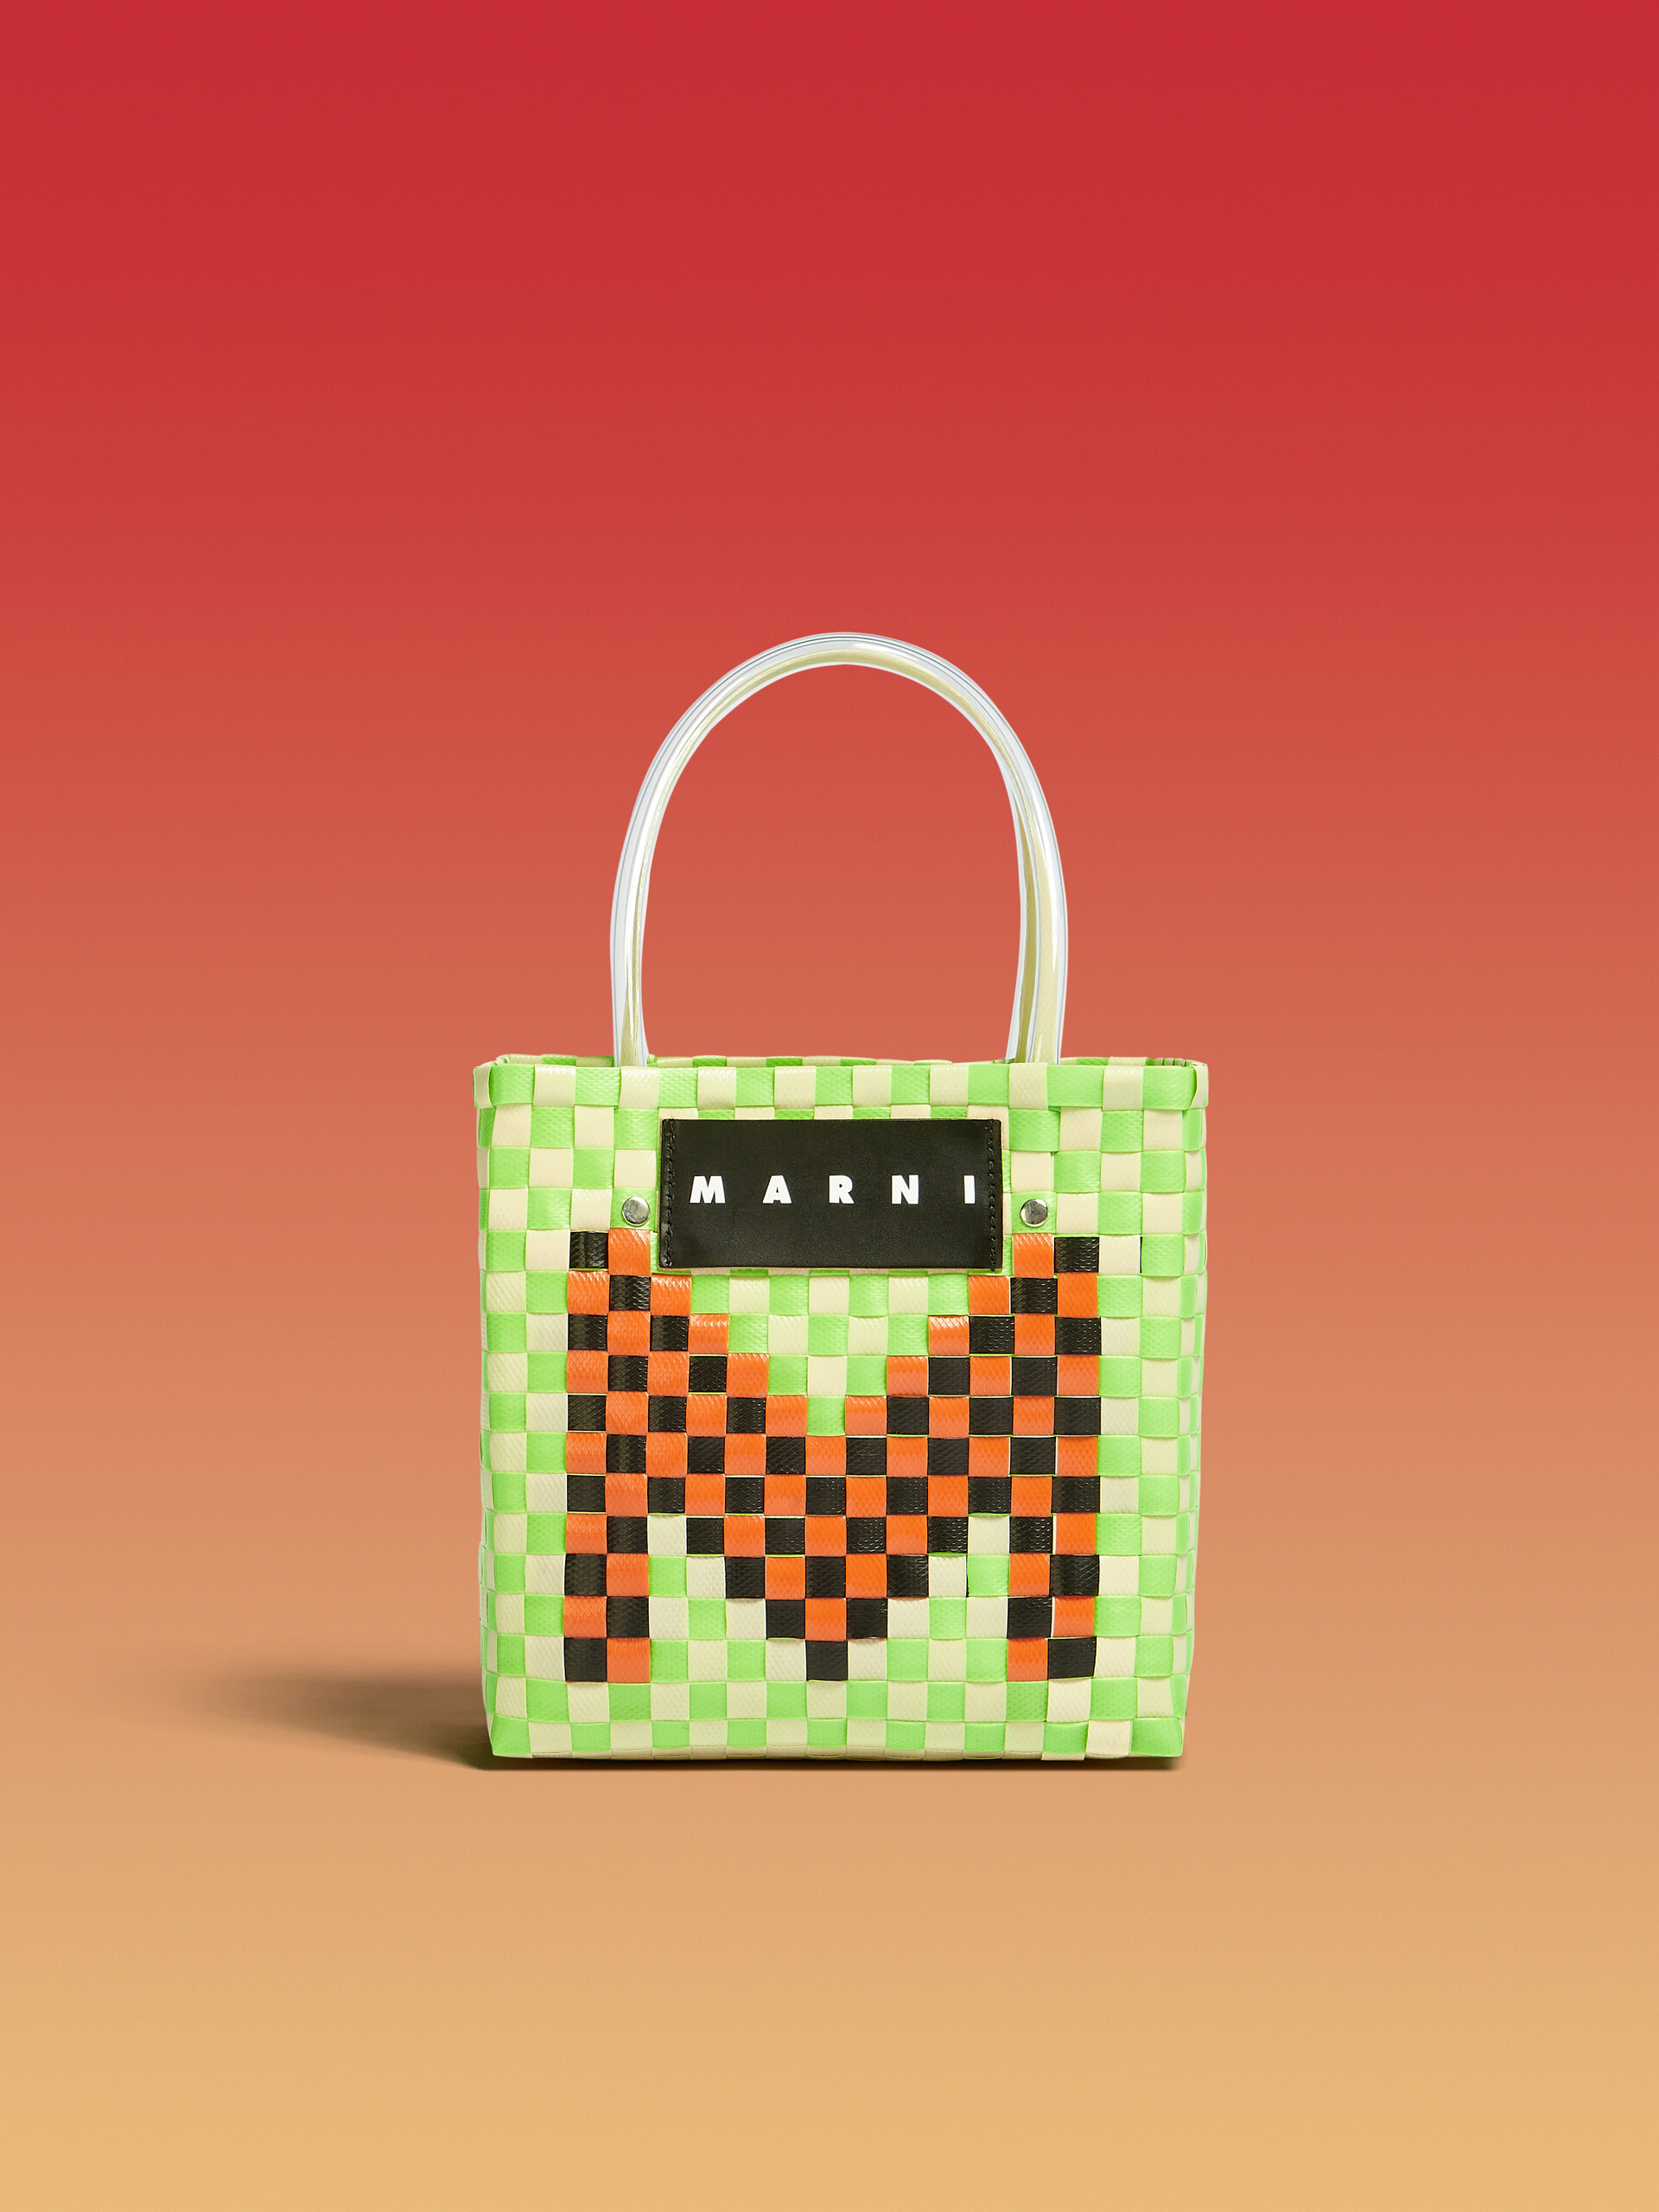 MARNI MARKET shopping bag in pink woven material with M logo - Shopping Bags - Image 1